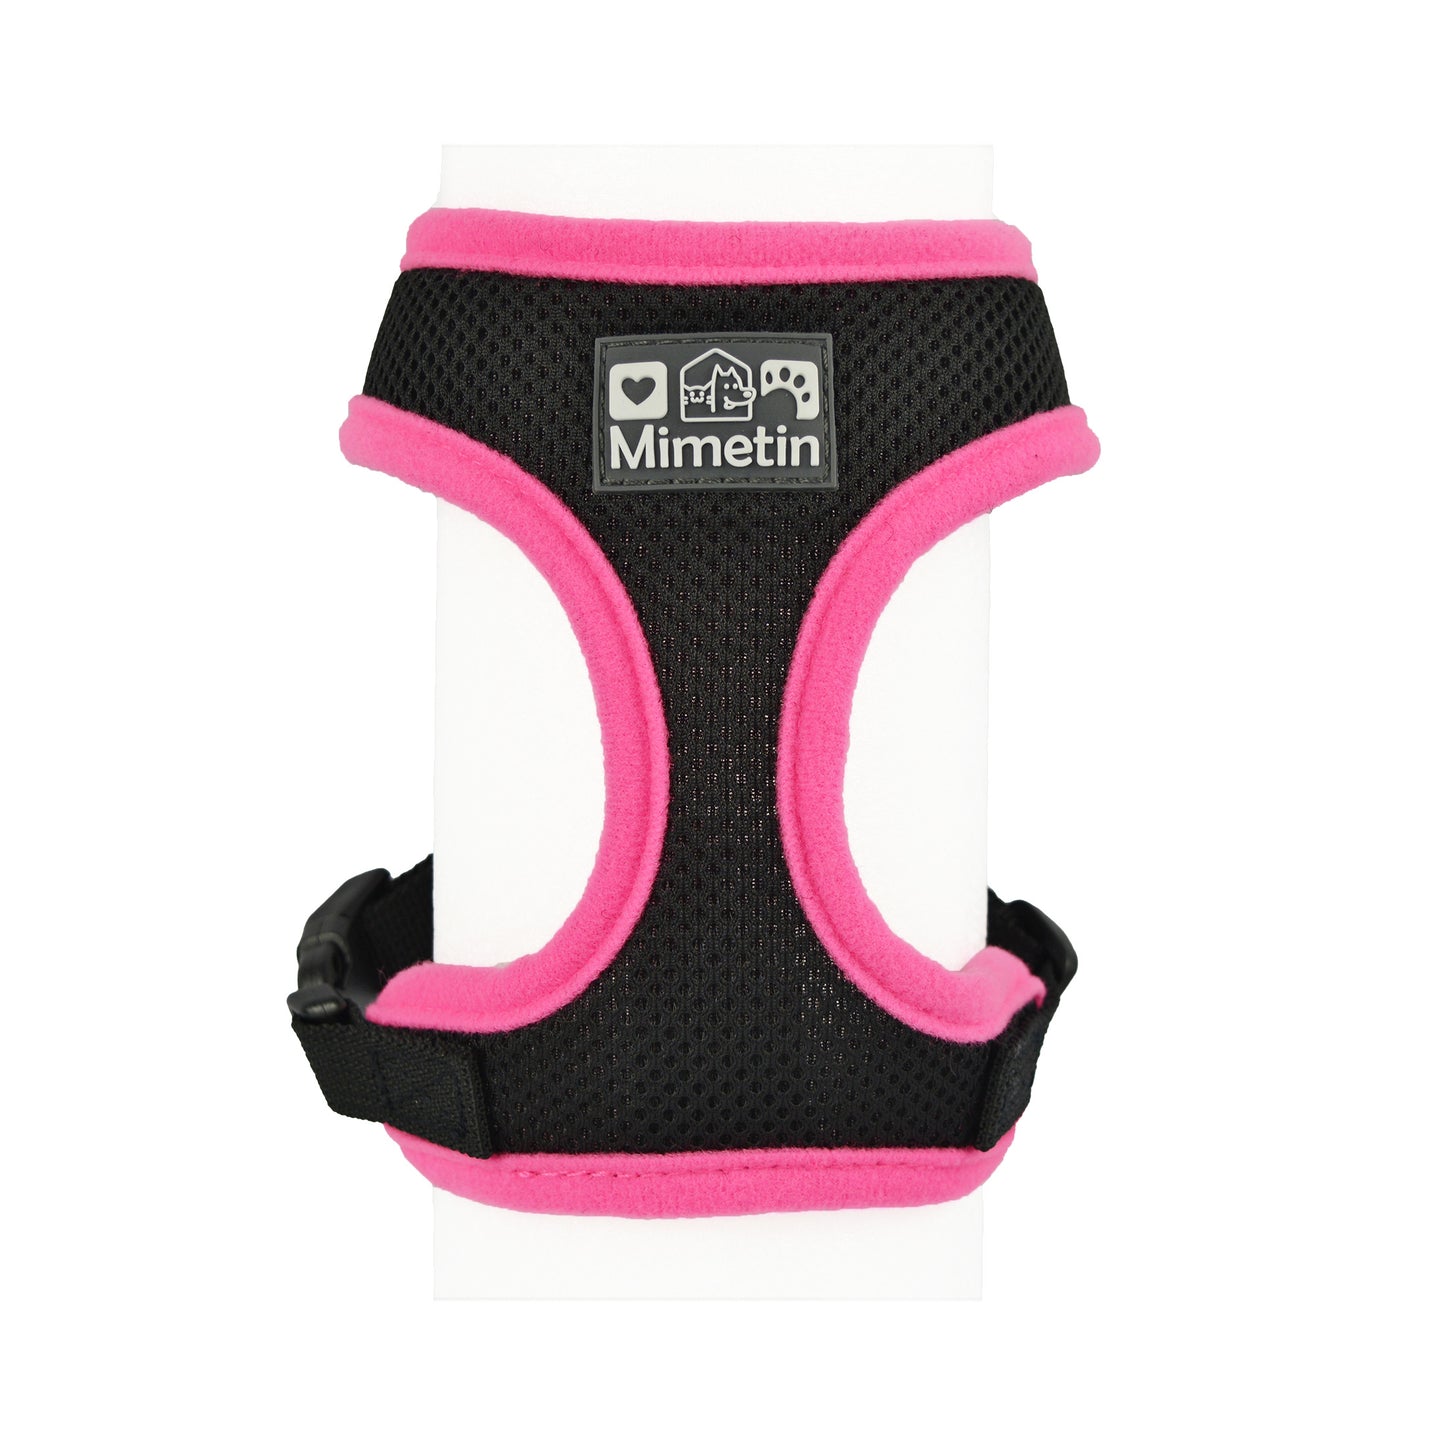 Mimetin Soft Pet Harness Adjustable Walking Pet Harness, Pink, S (14" to 19" Chest Size)